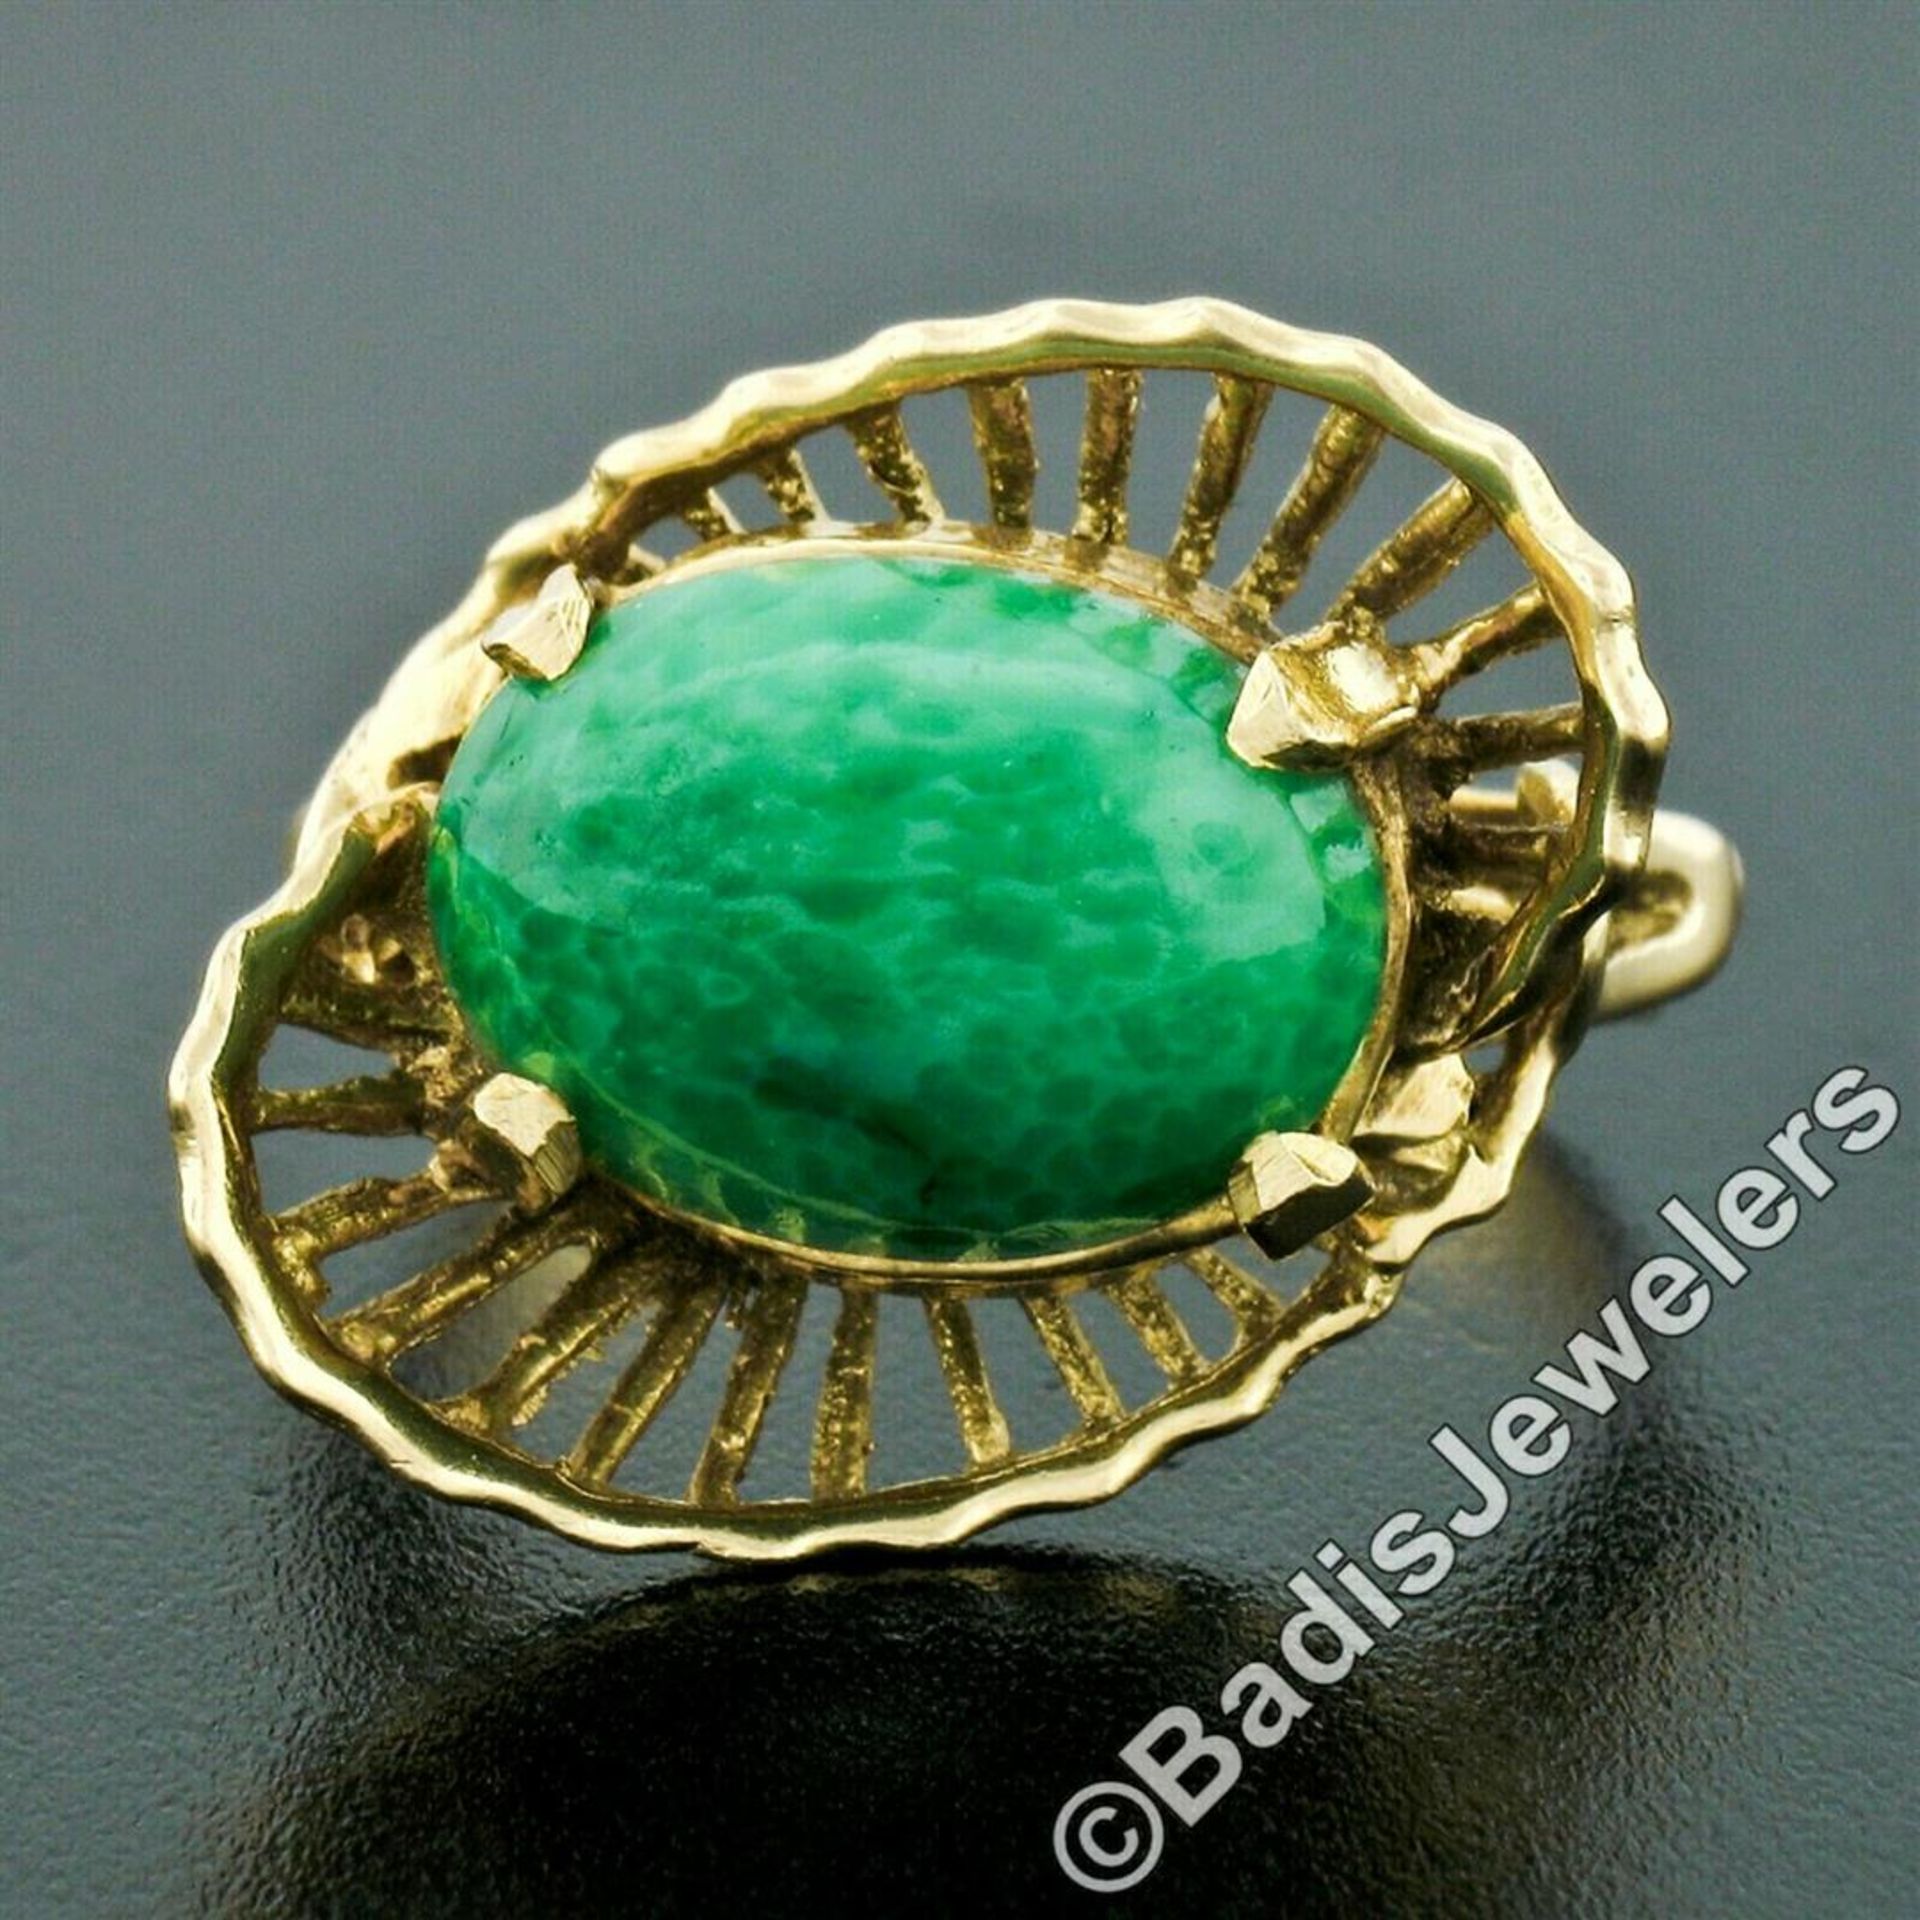 Vintage Handmade 18kt Yellow Gold Oval Jade Solitaire Ring - Image 2 of 8